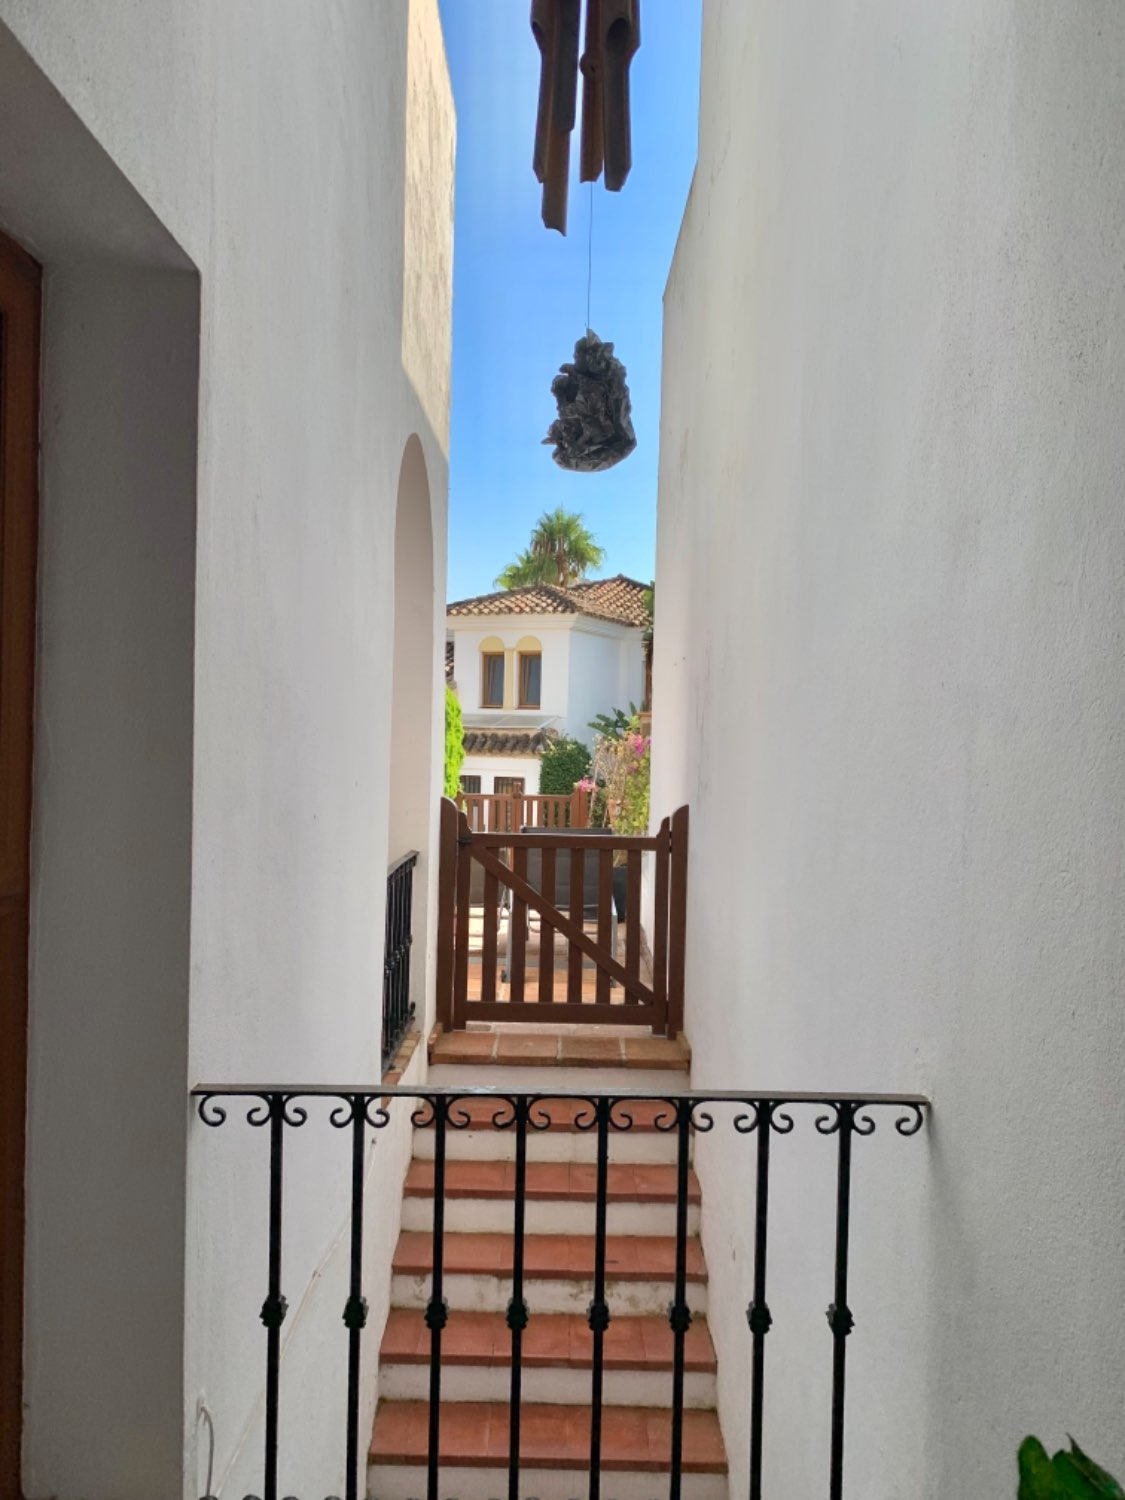 Beautiful  townhouse  in Alcaidesa  with direct access to the beach with a  separated small apartment